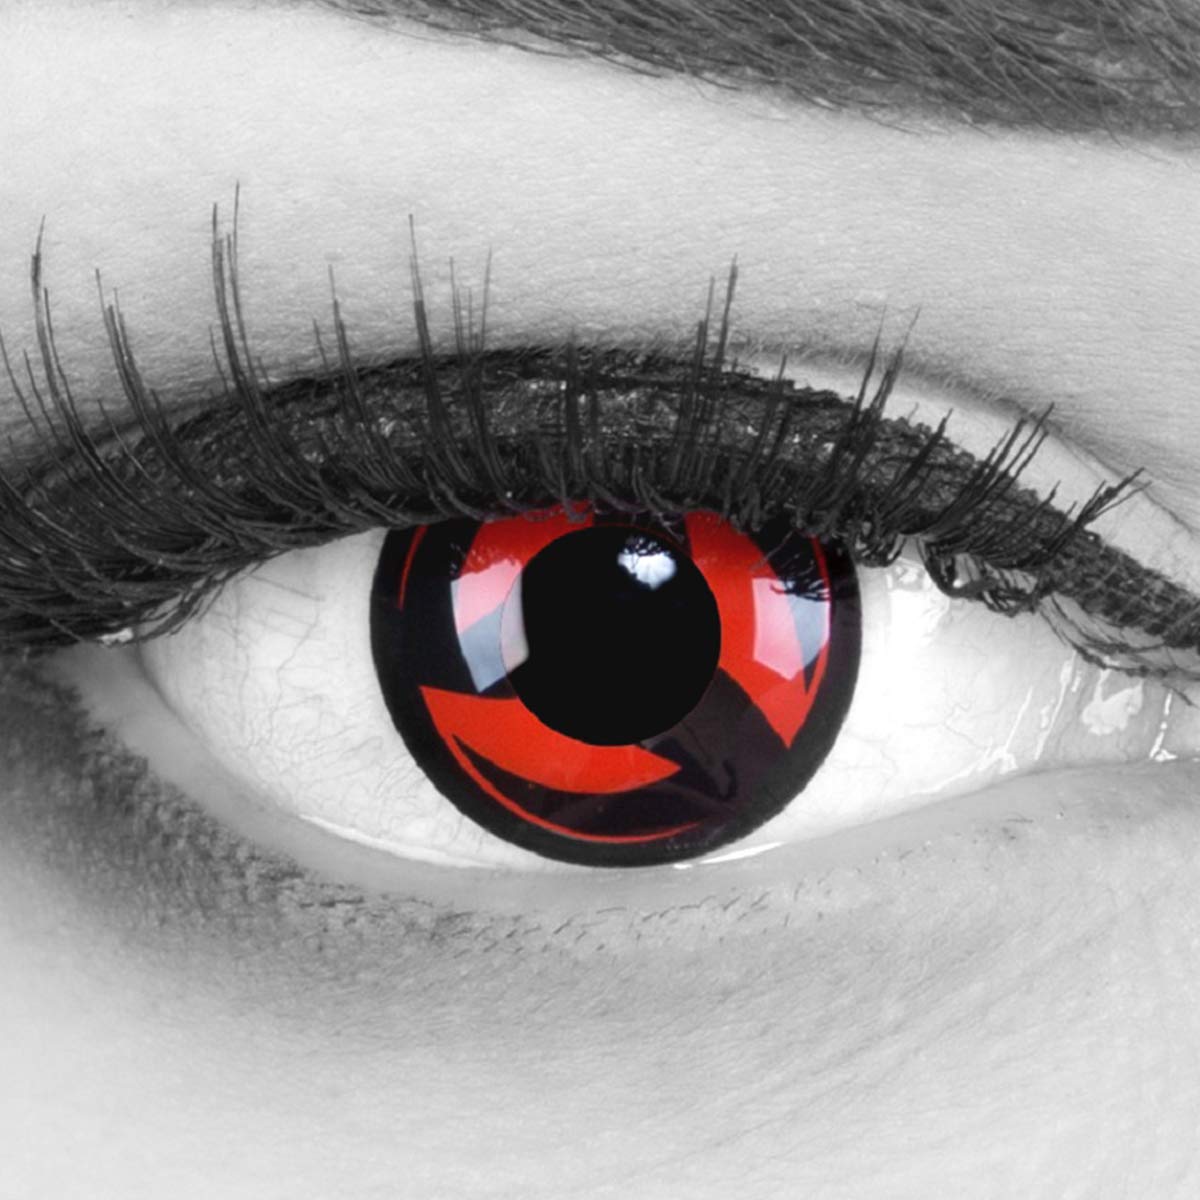 Anime Gradient Contacts for Cosplay (0.00 only) – Candylens